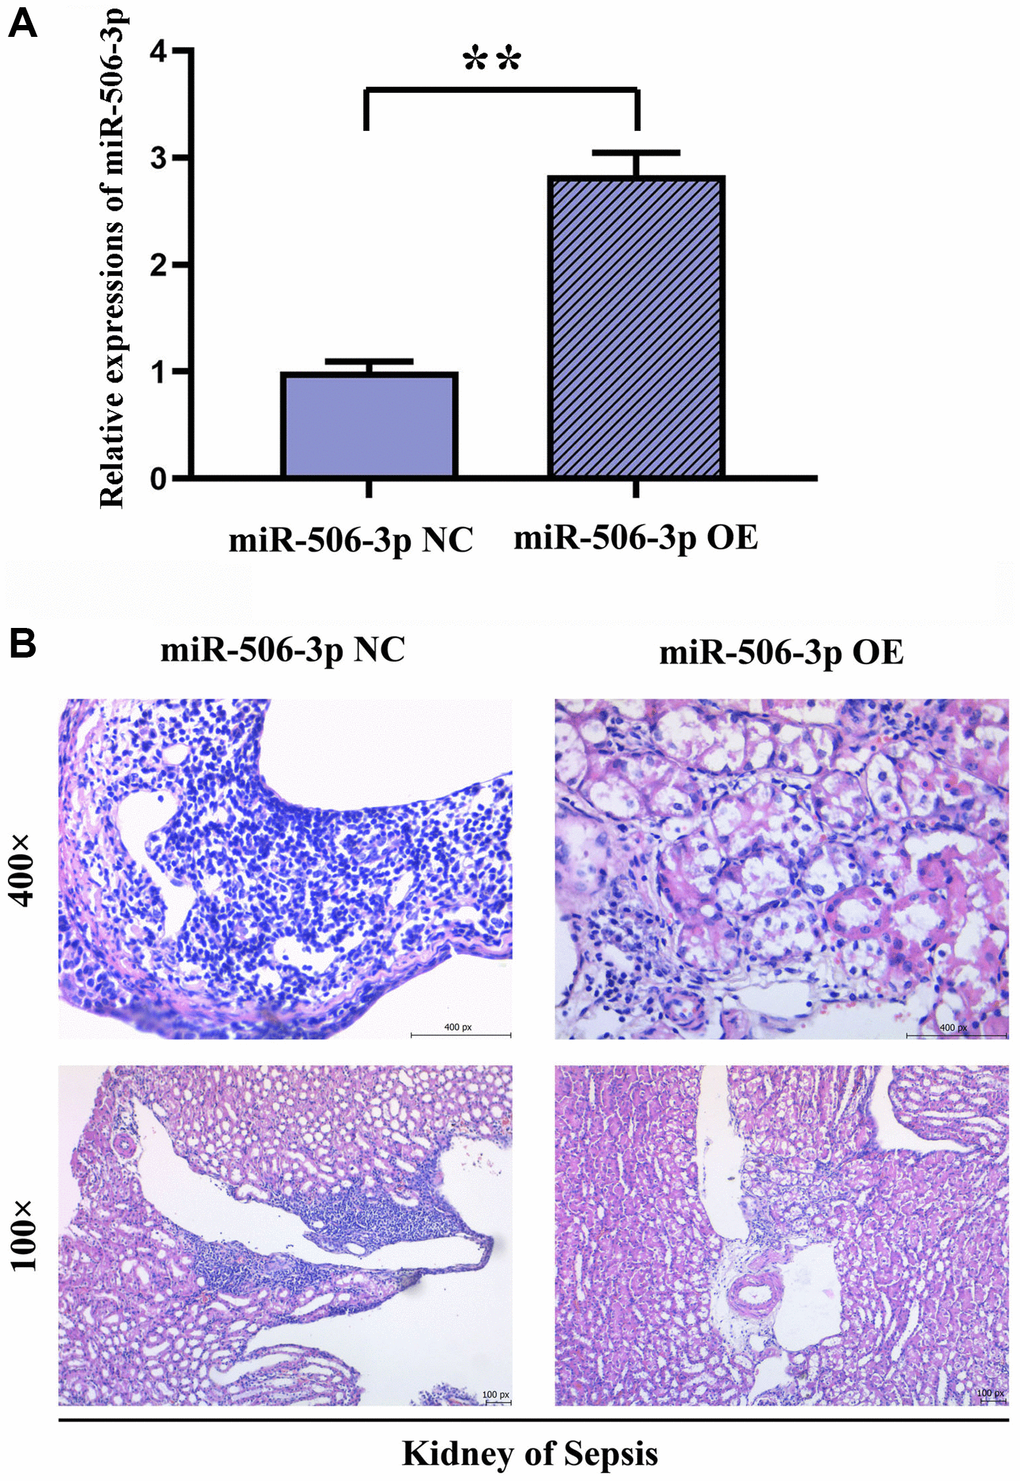 Effect of overexpression of miR-506-3p on pathological changes in kidney tissues in SA-AKI. (A) Expression of miR-506-3p in each group. (B) Through HE staining, it was found that the degree of tissue damage in the miR-506-3p OE group was significantly weakened compared with that in the miR-506-3p NC group.